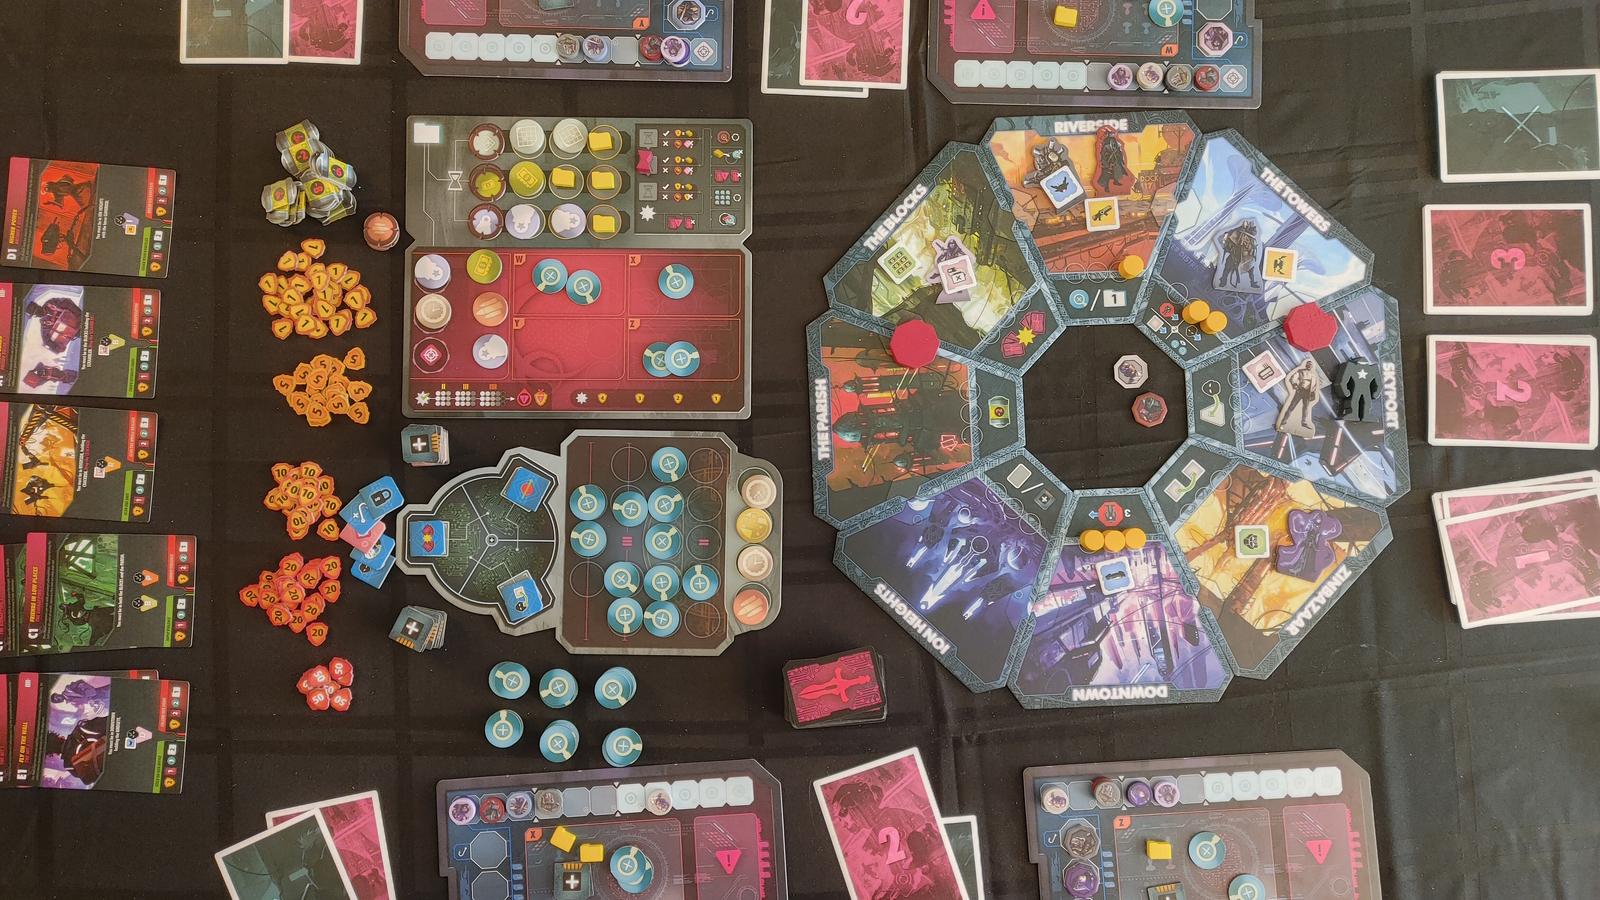 Board Game Reviews by Josh: Ice Cool Review